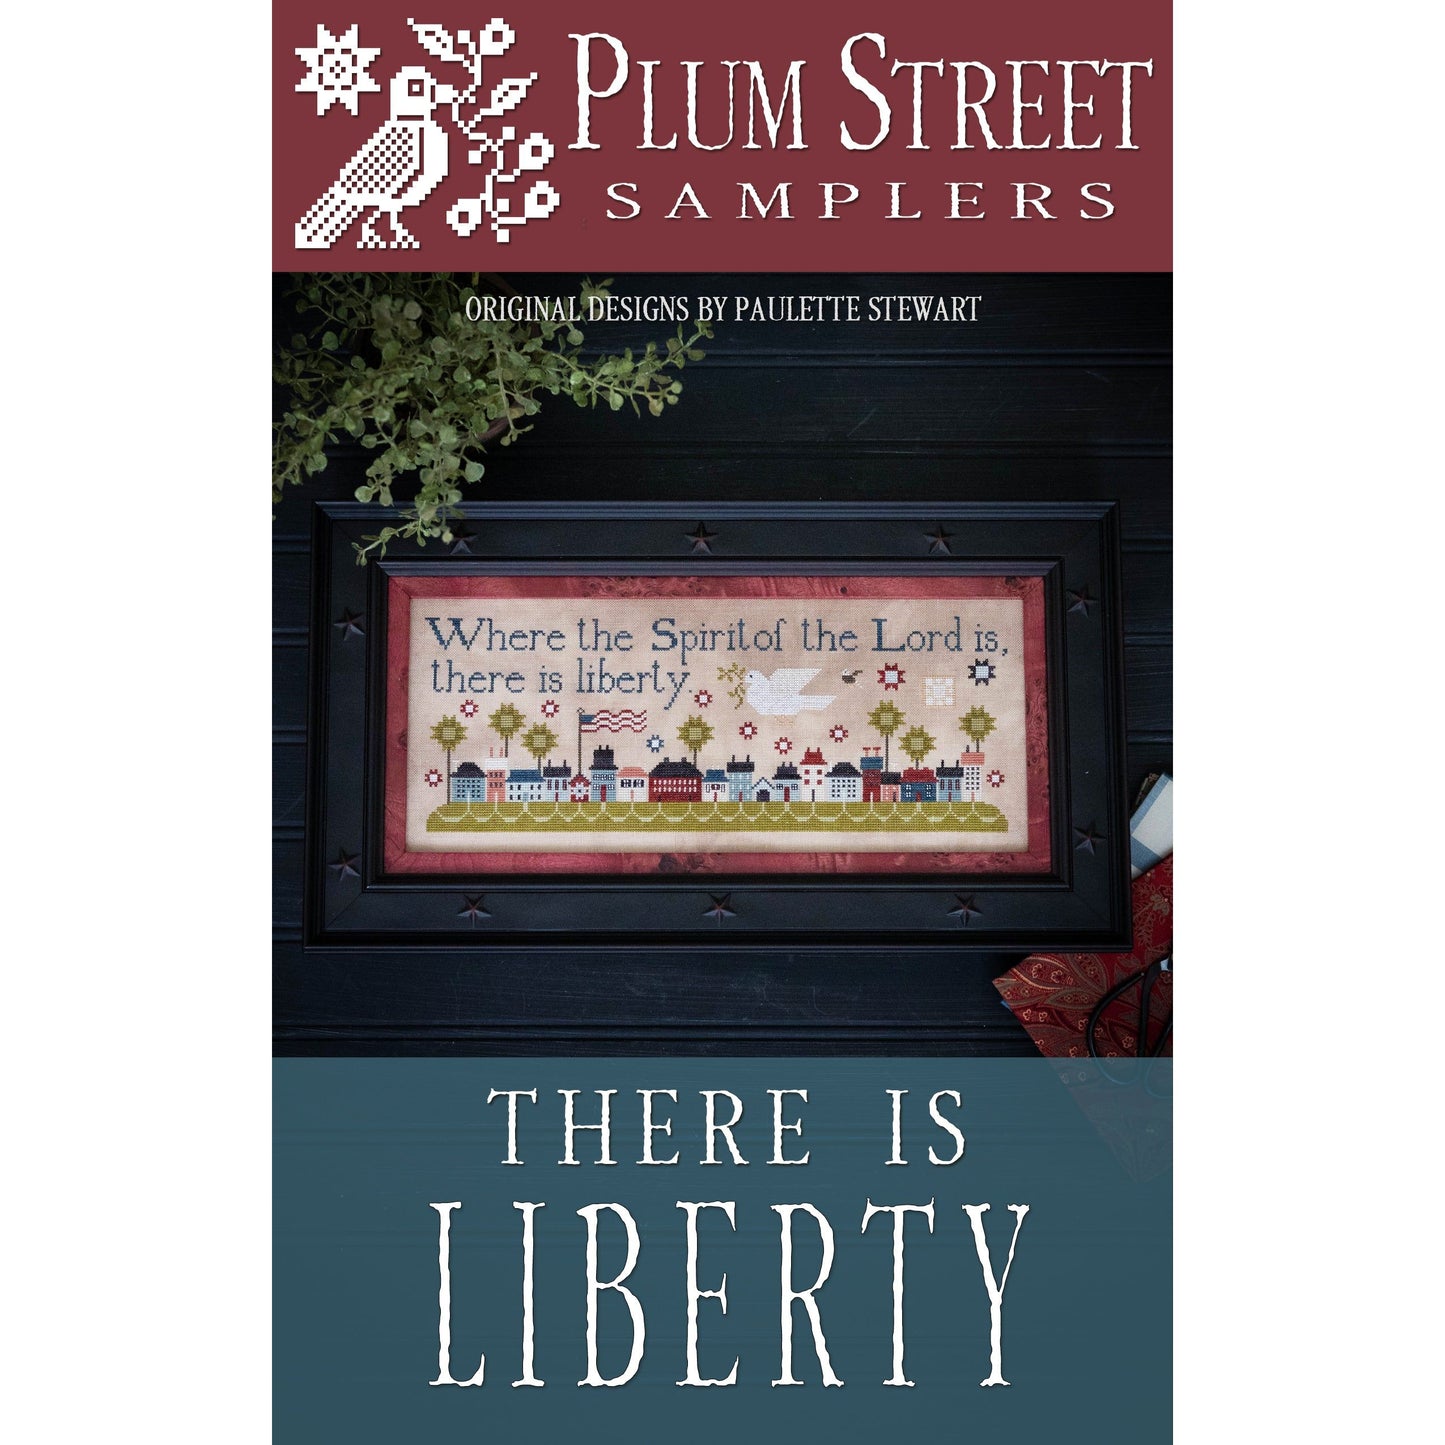 Plum Street Samplers | There Is Liberty COMING SOON!